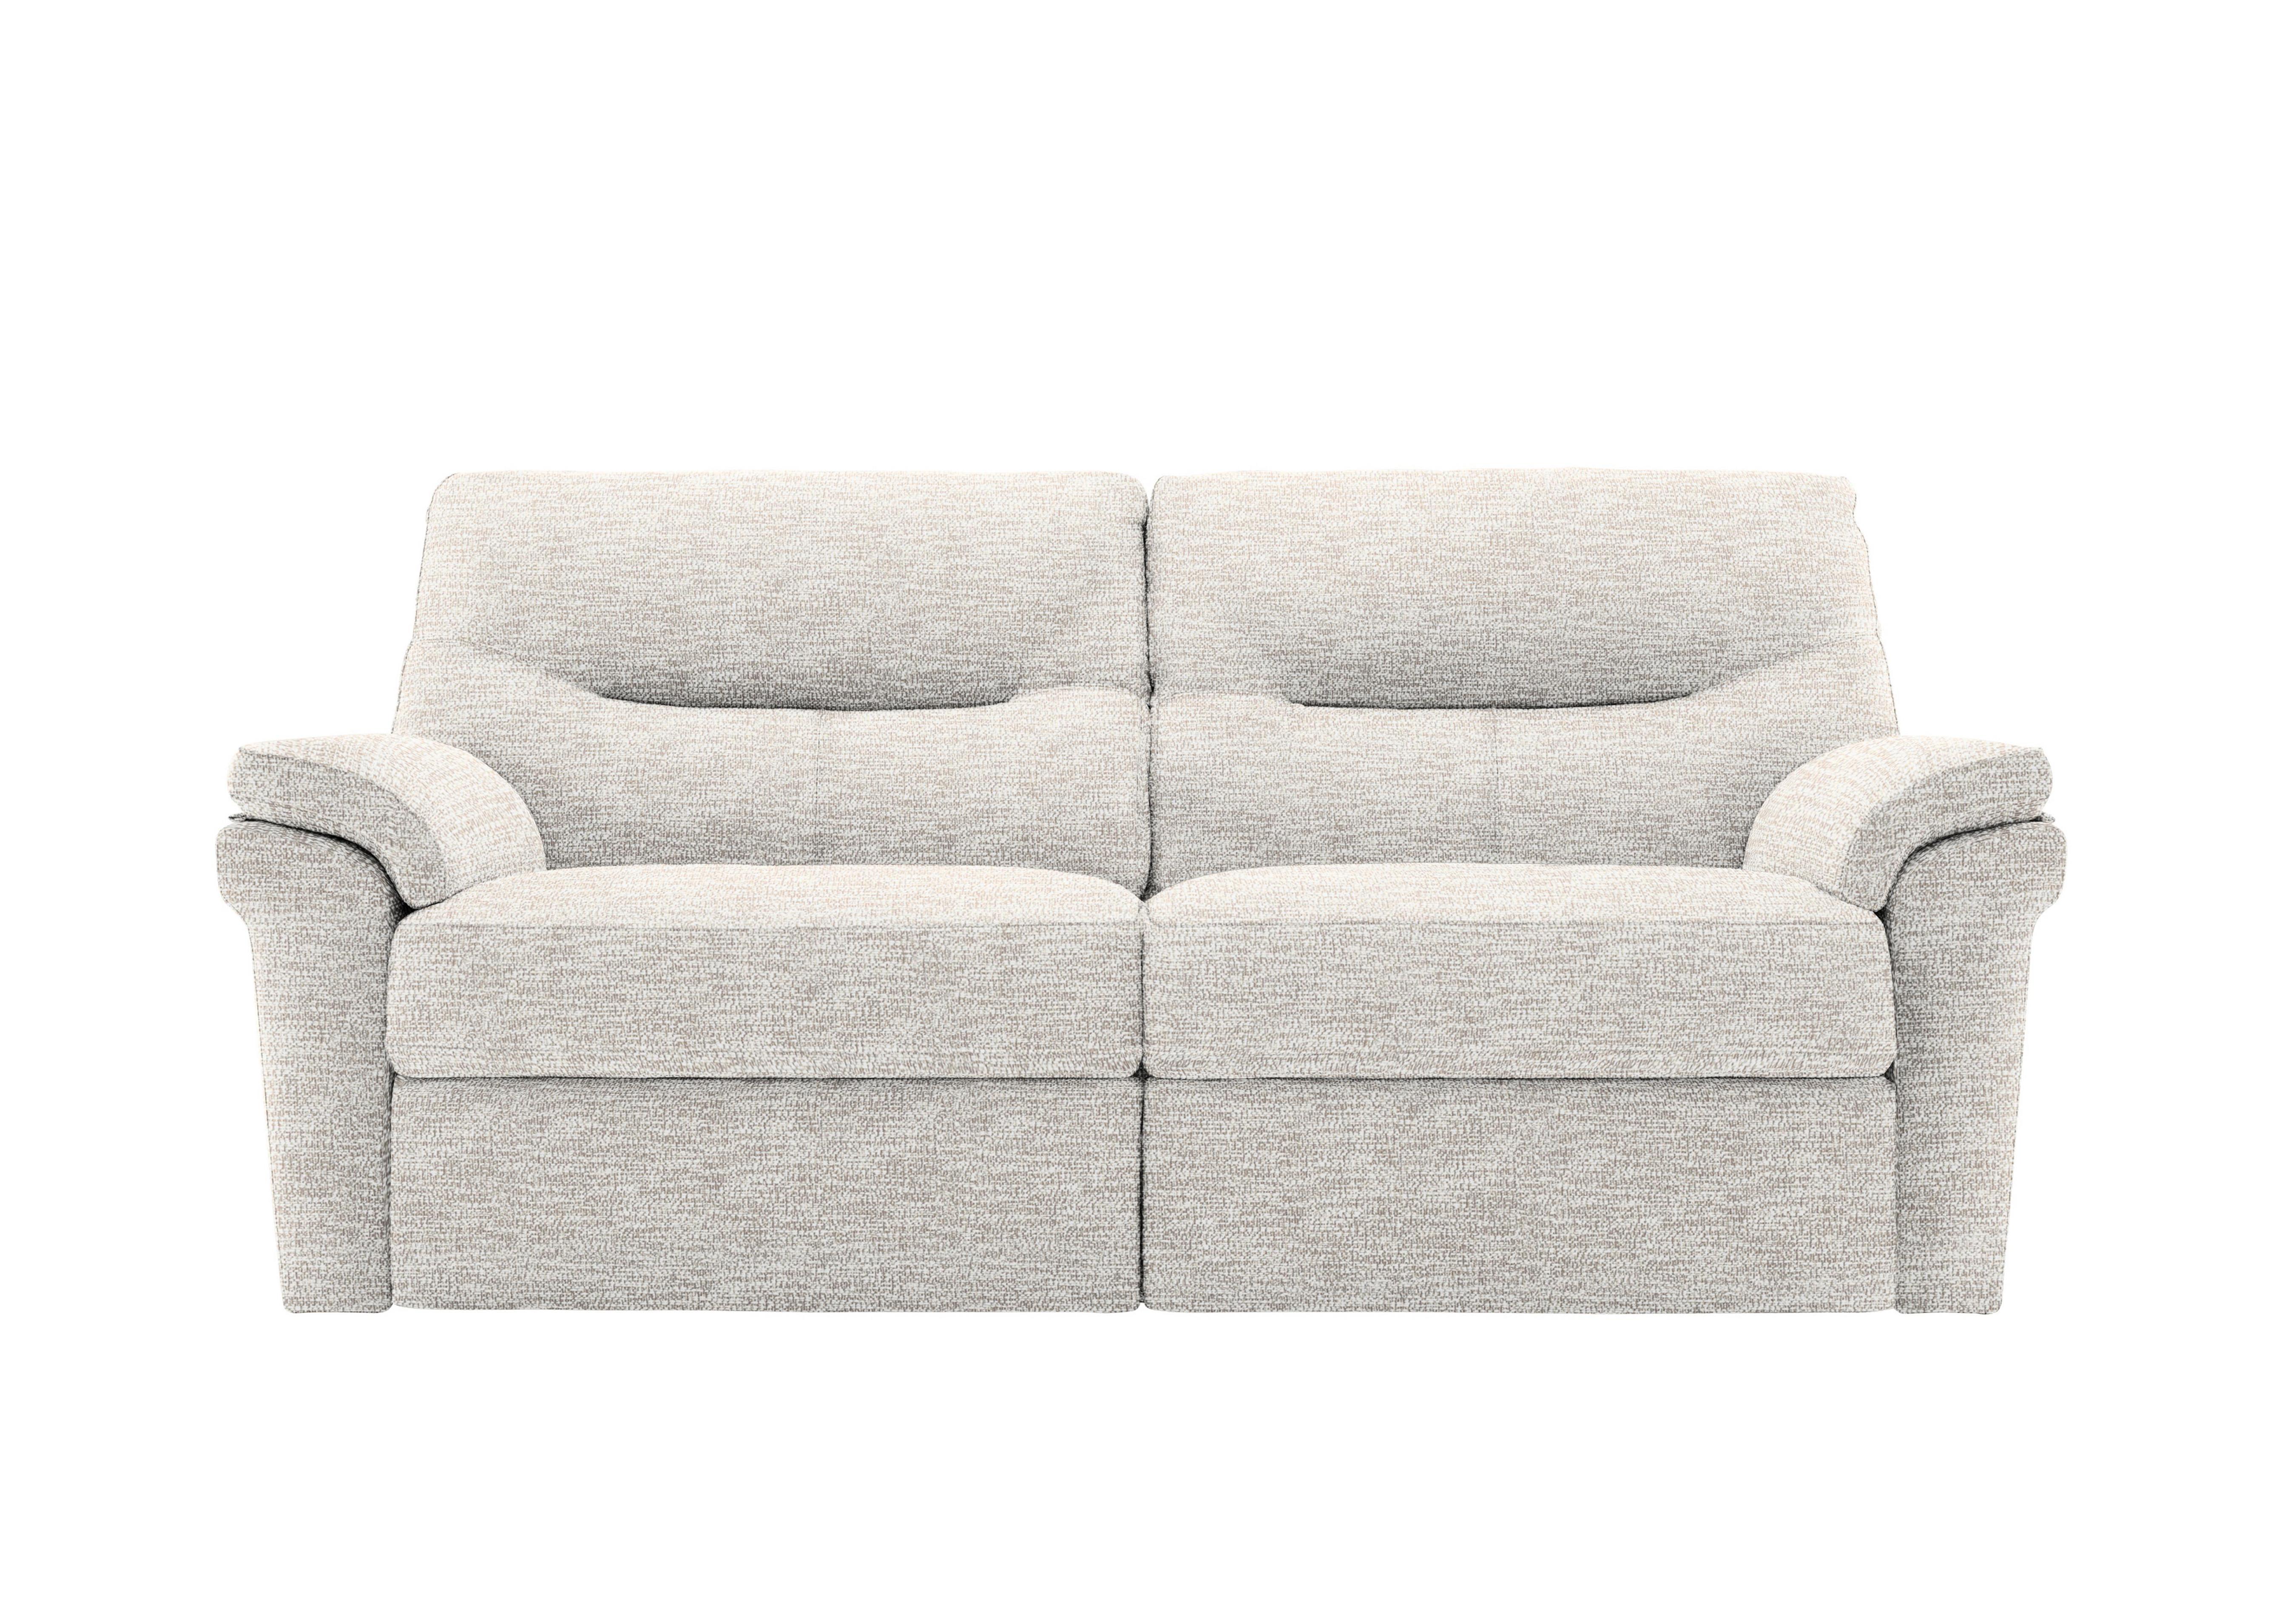 Seattle 3 Seater Fabric Power Recliner Sofa with Power Lumbar in C931 Rush Cream on Furniture Village